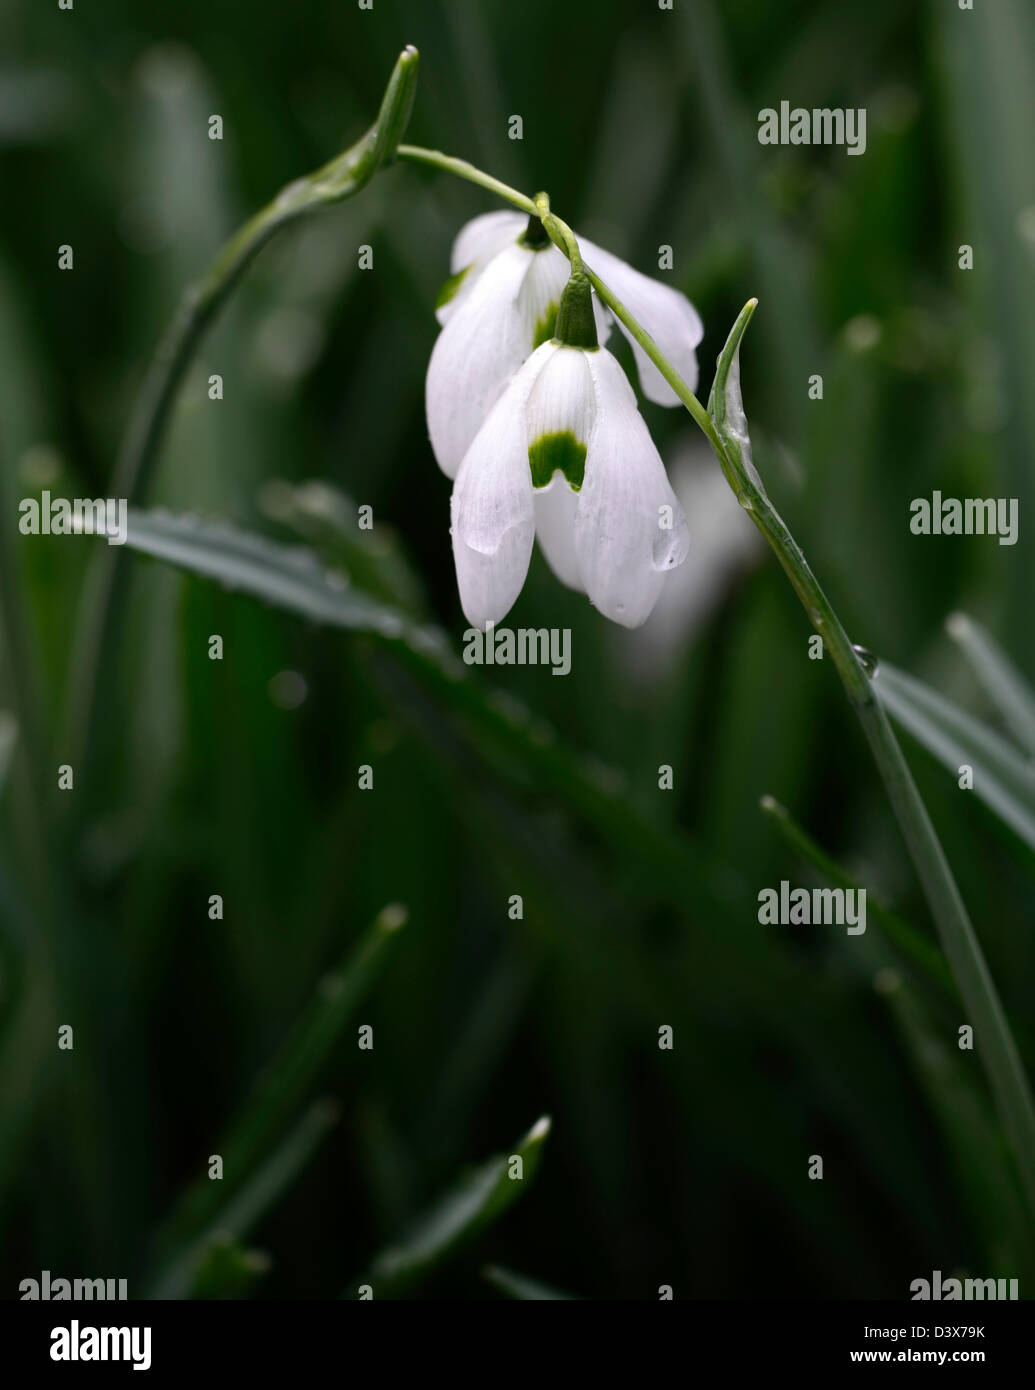 galanthus ophelia snowdrop snowdrops winter closeup plant portraits white green markings flowers blooms bloom spring bulb Stock Photo